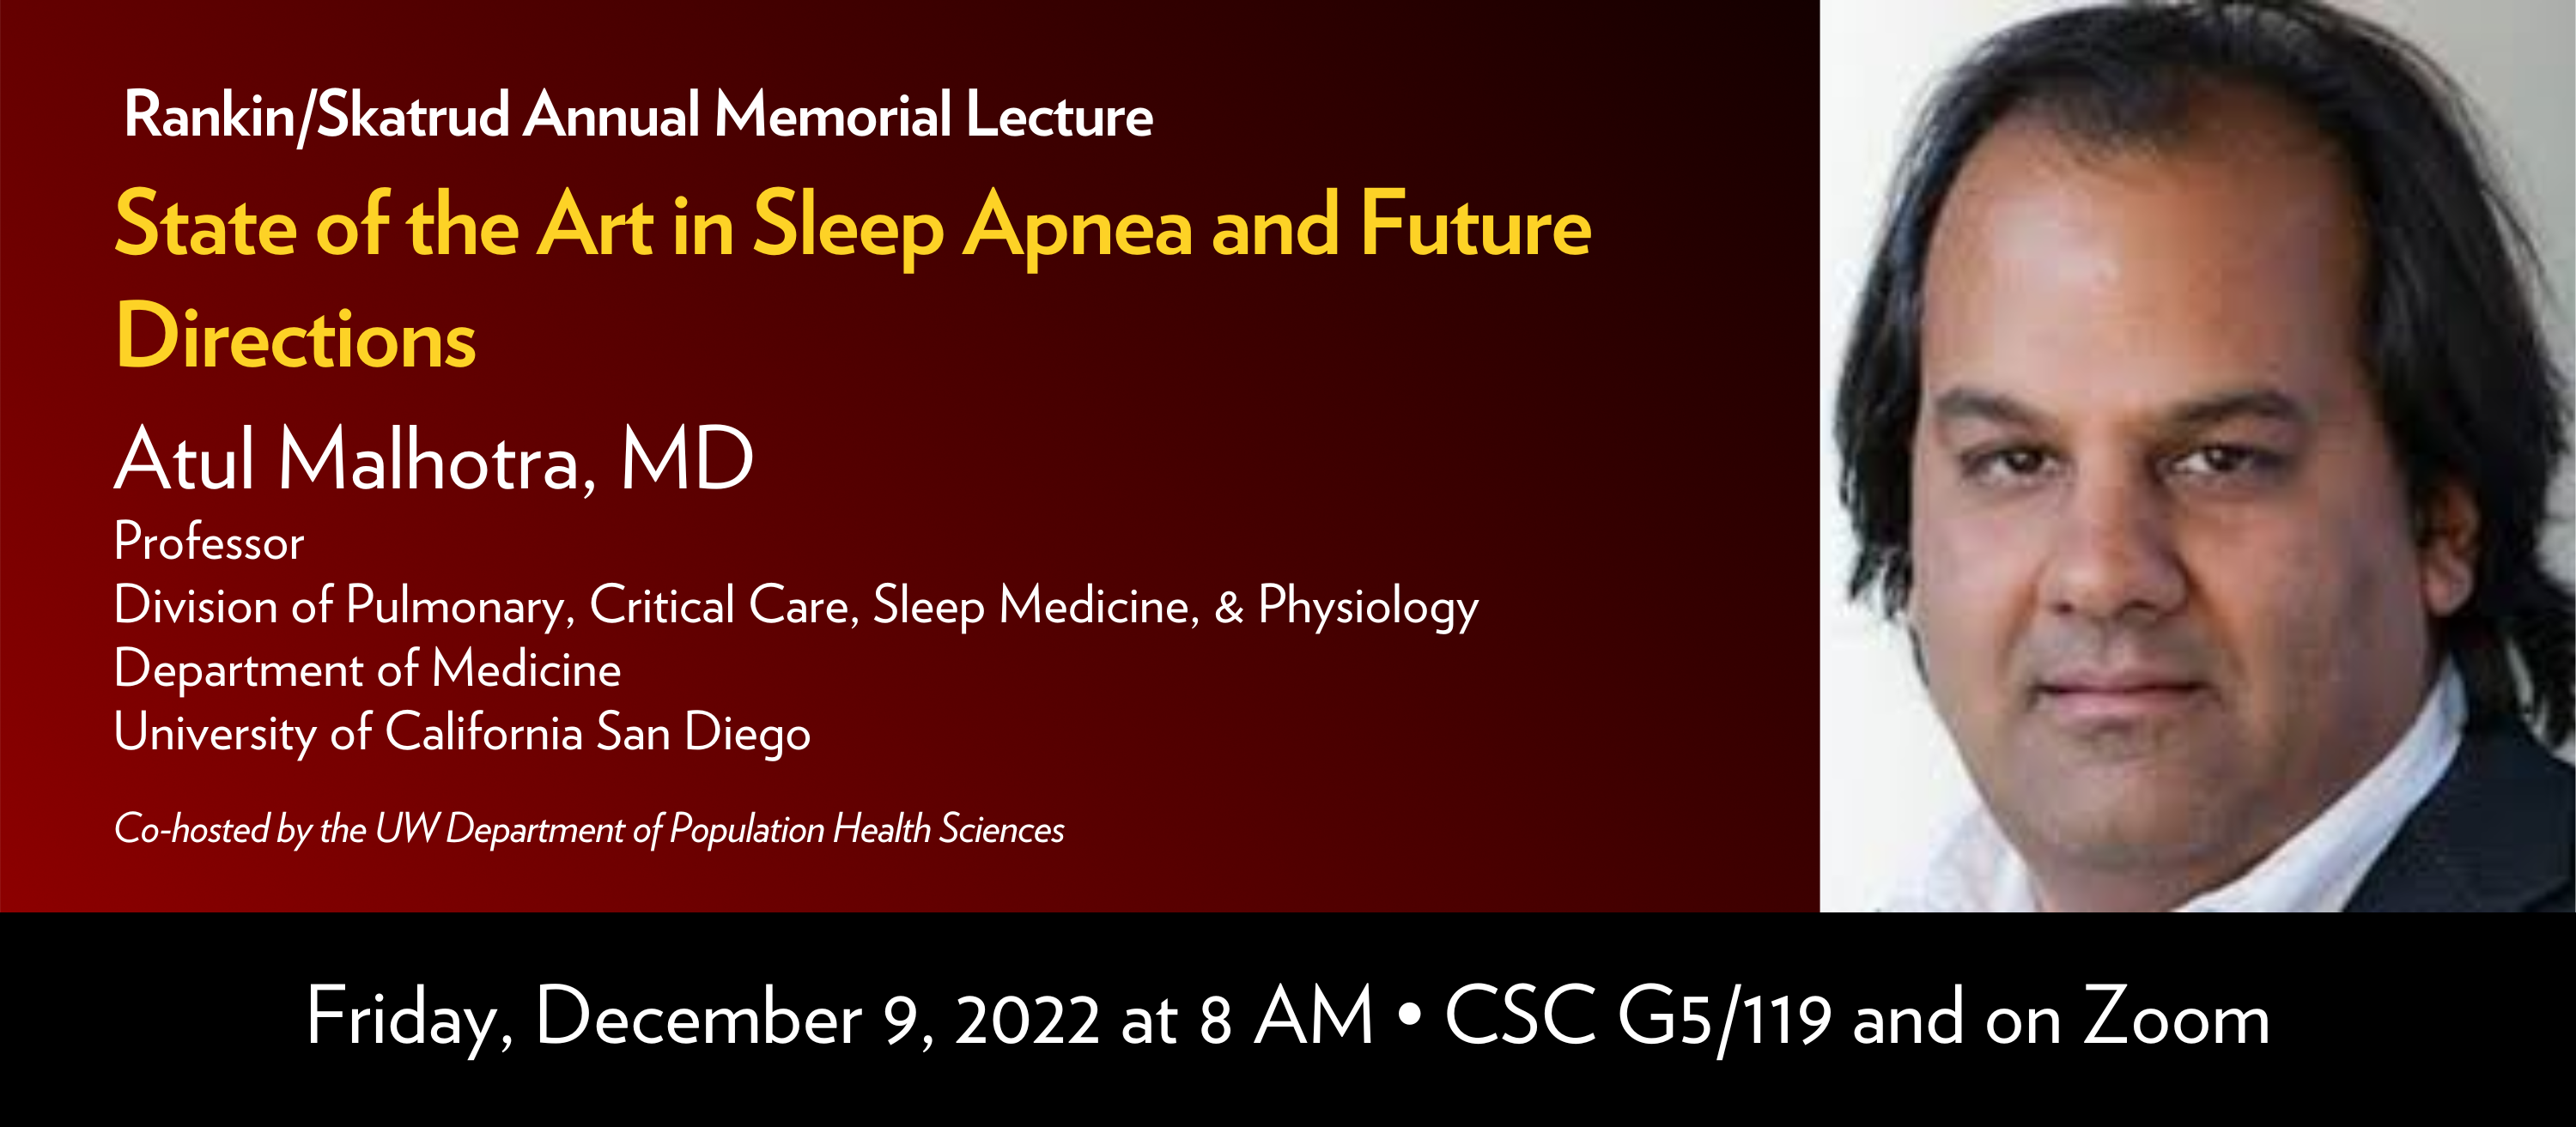 Title: State of the Art in Sleep Apnea and Future Directions